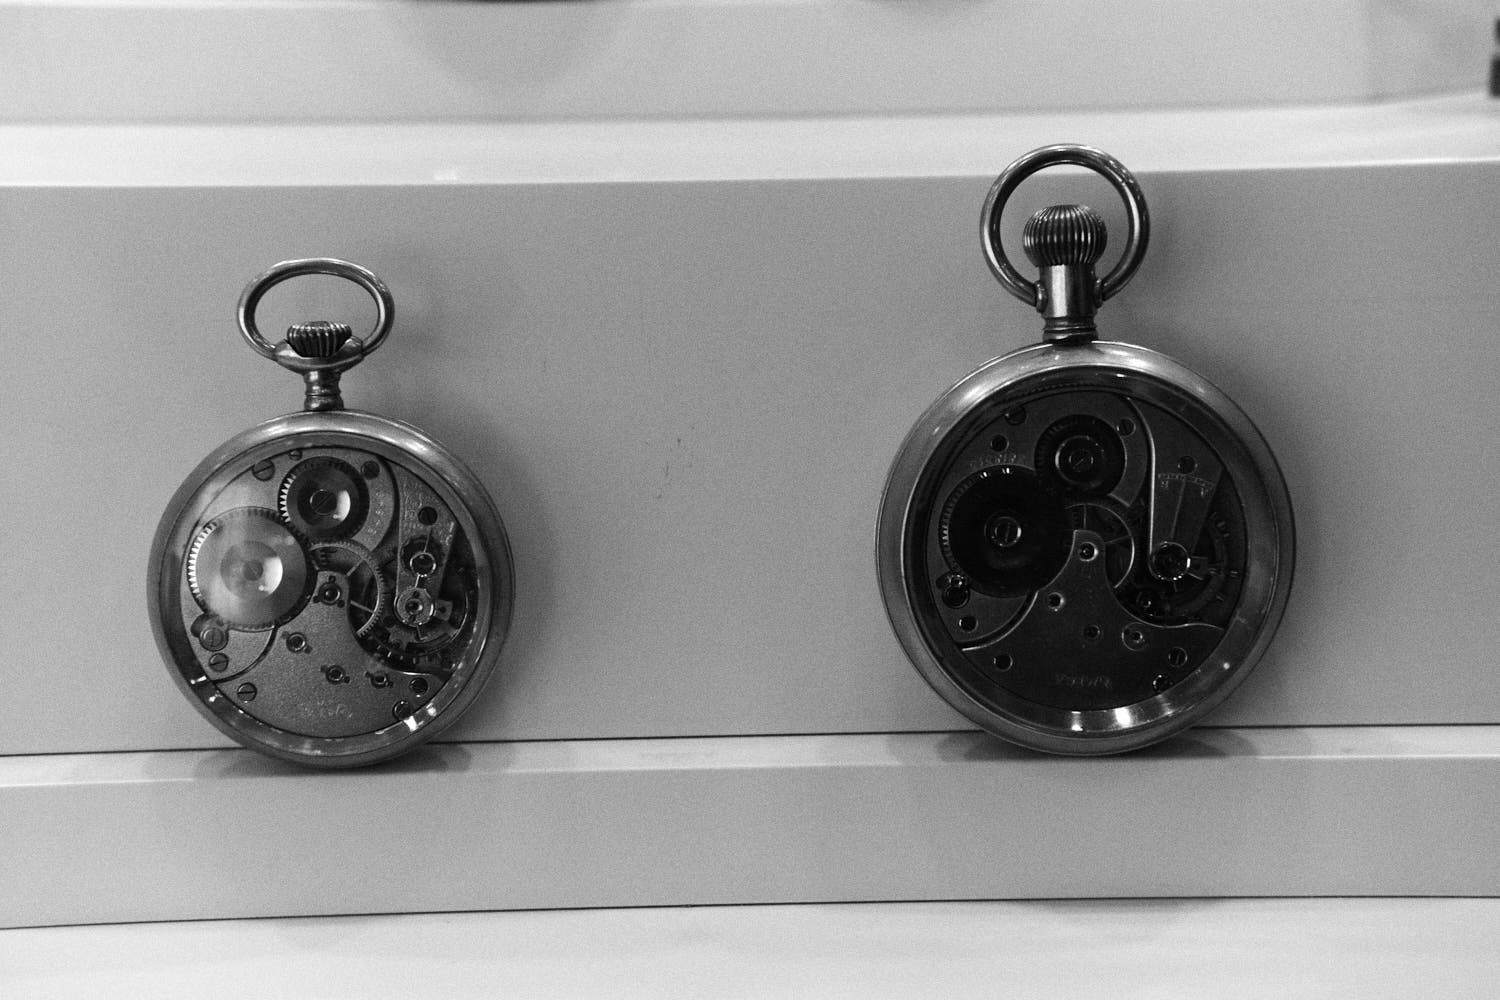 Movements-1 - Omega Museum Visit - Monochrome Watches